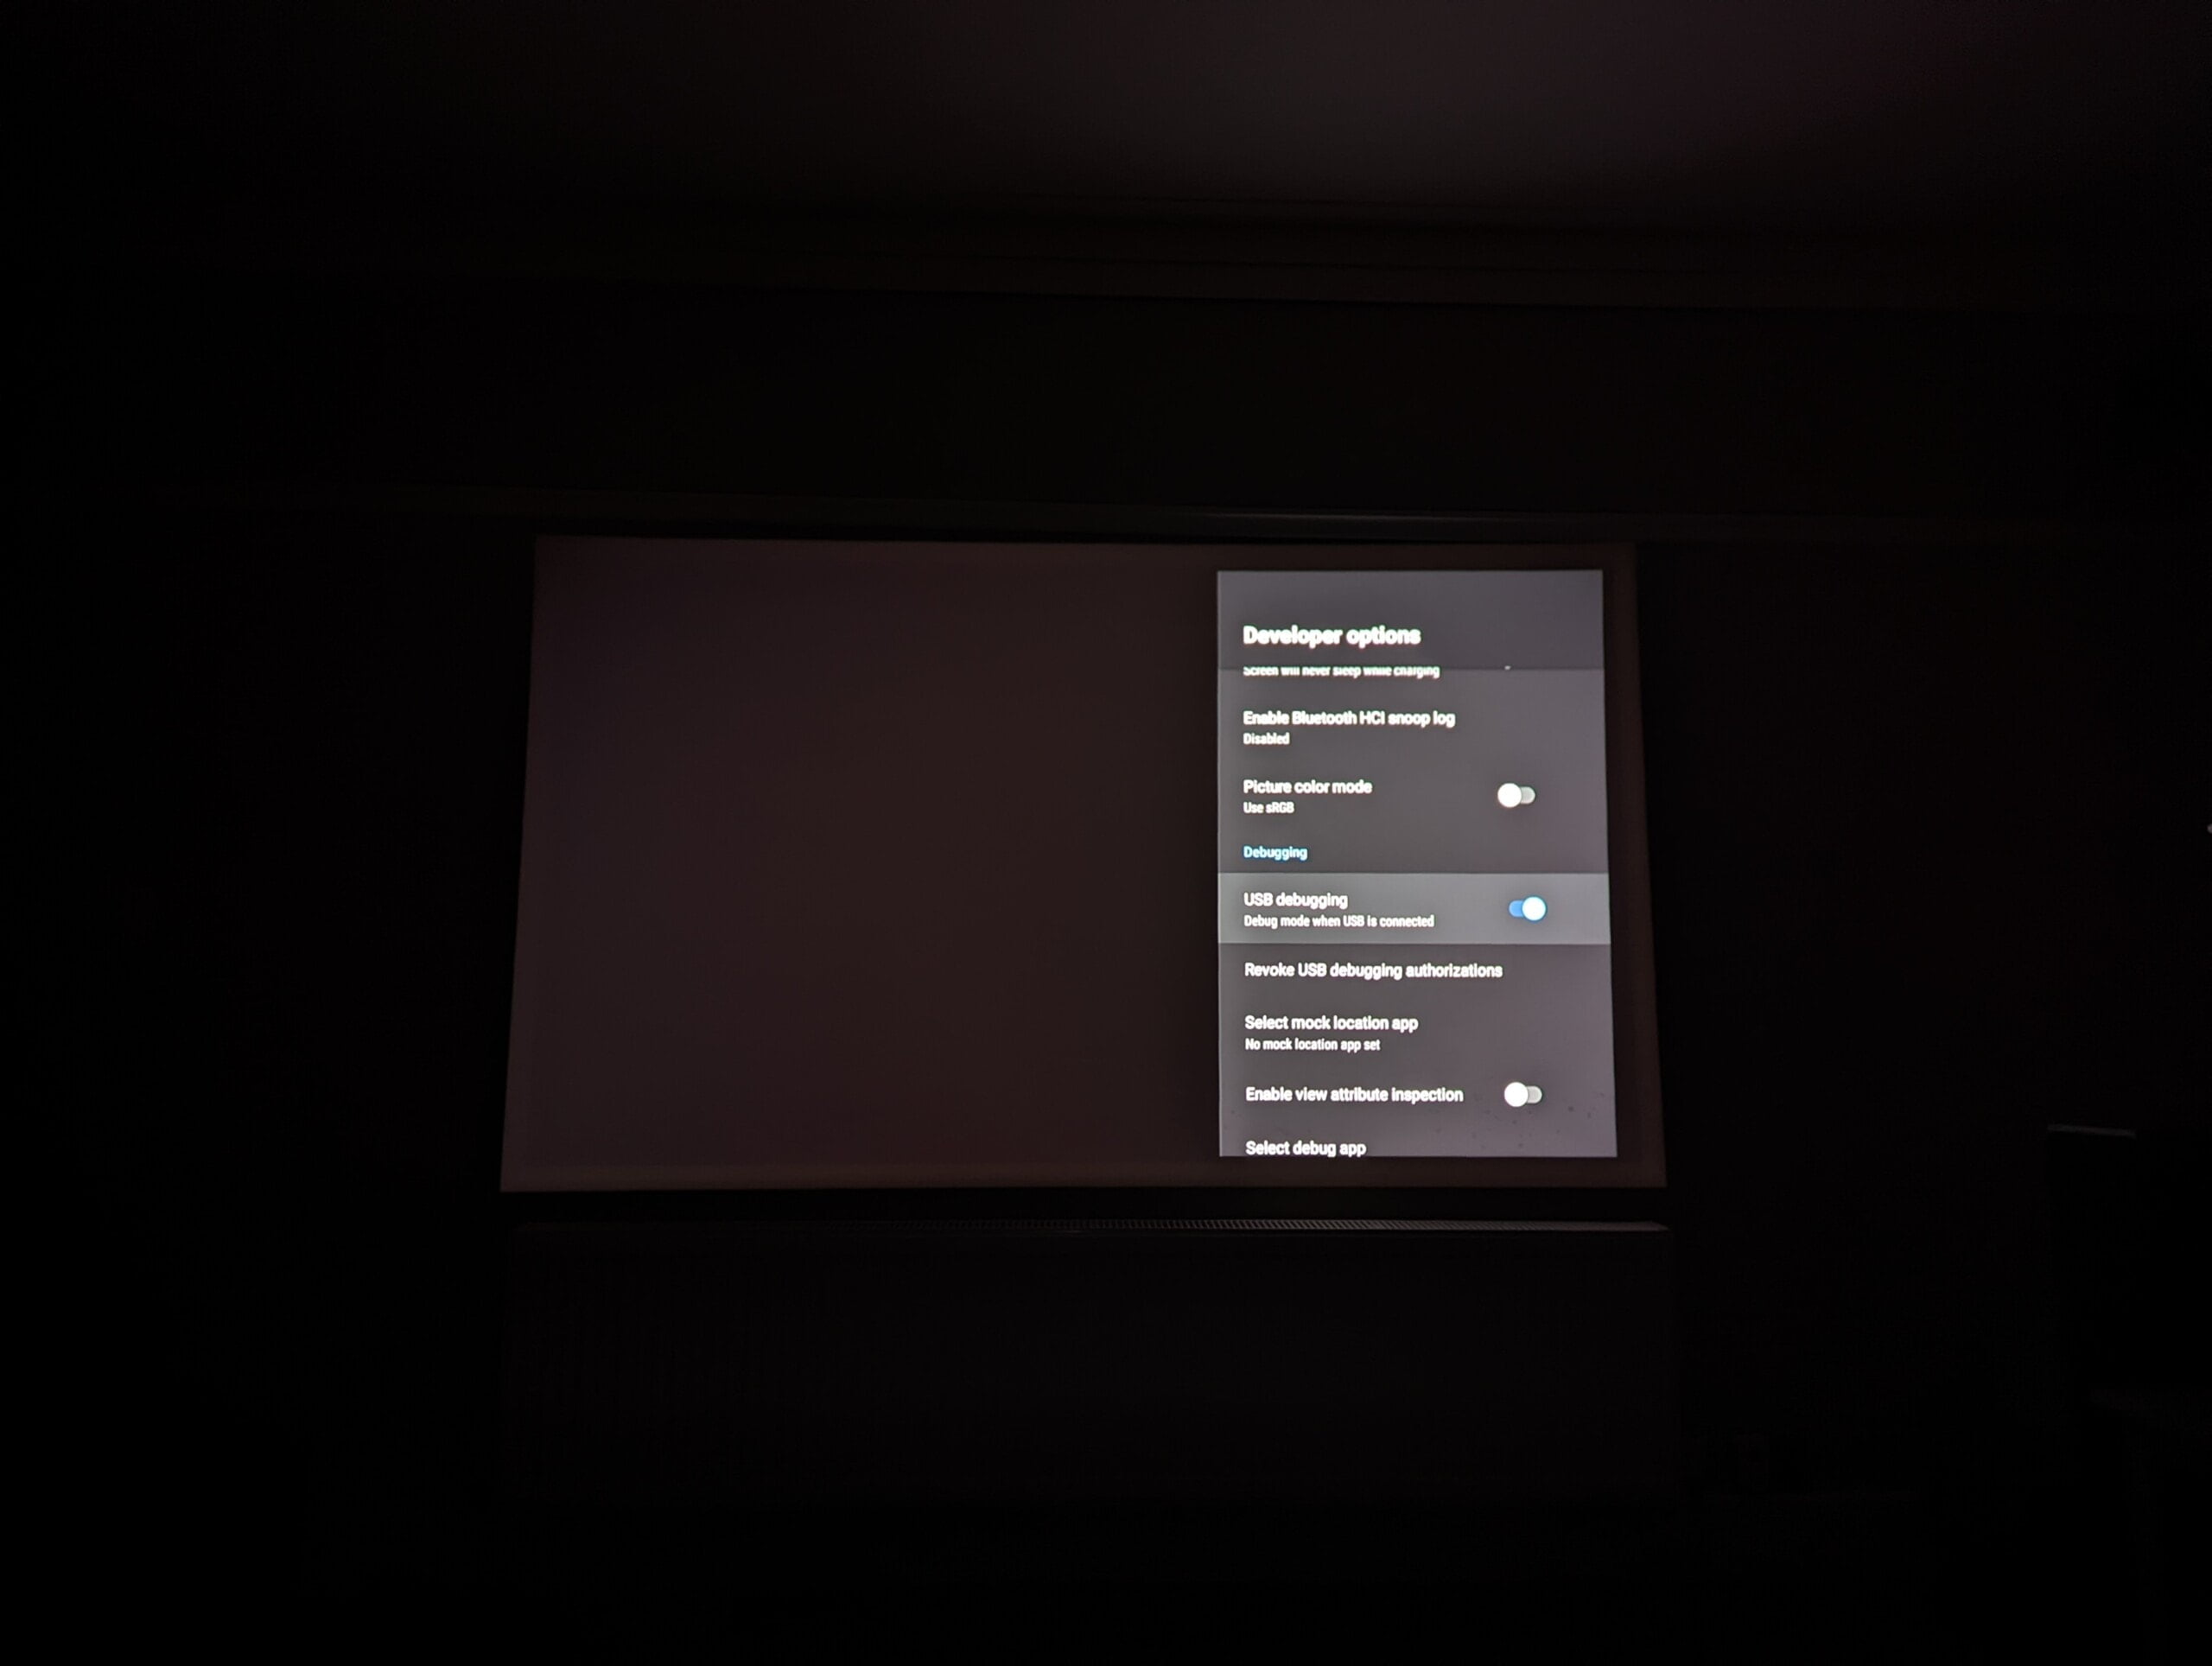 BenQ GV30 Portable Projector Review9 scaled - BenQ GV30 Portable Projector Review – How does it compare vs the Nebula Capsule II